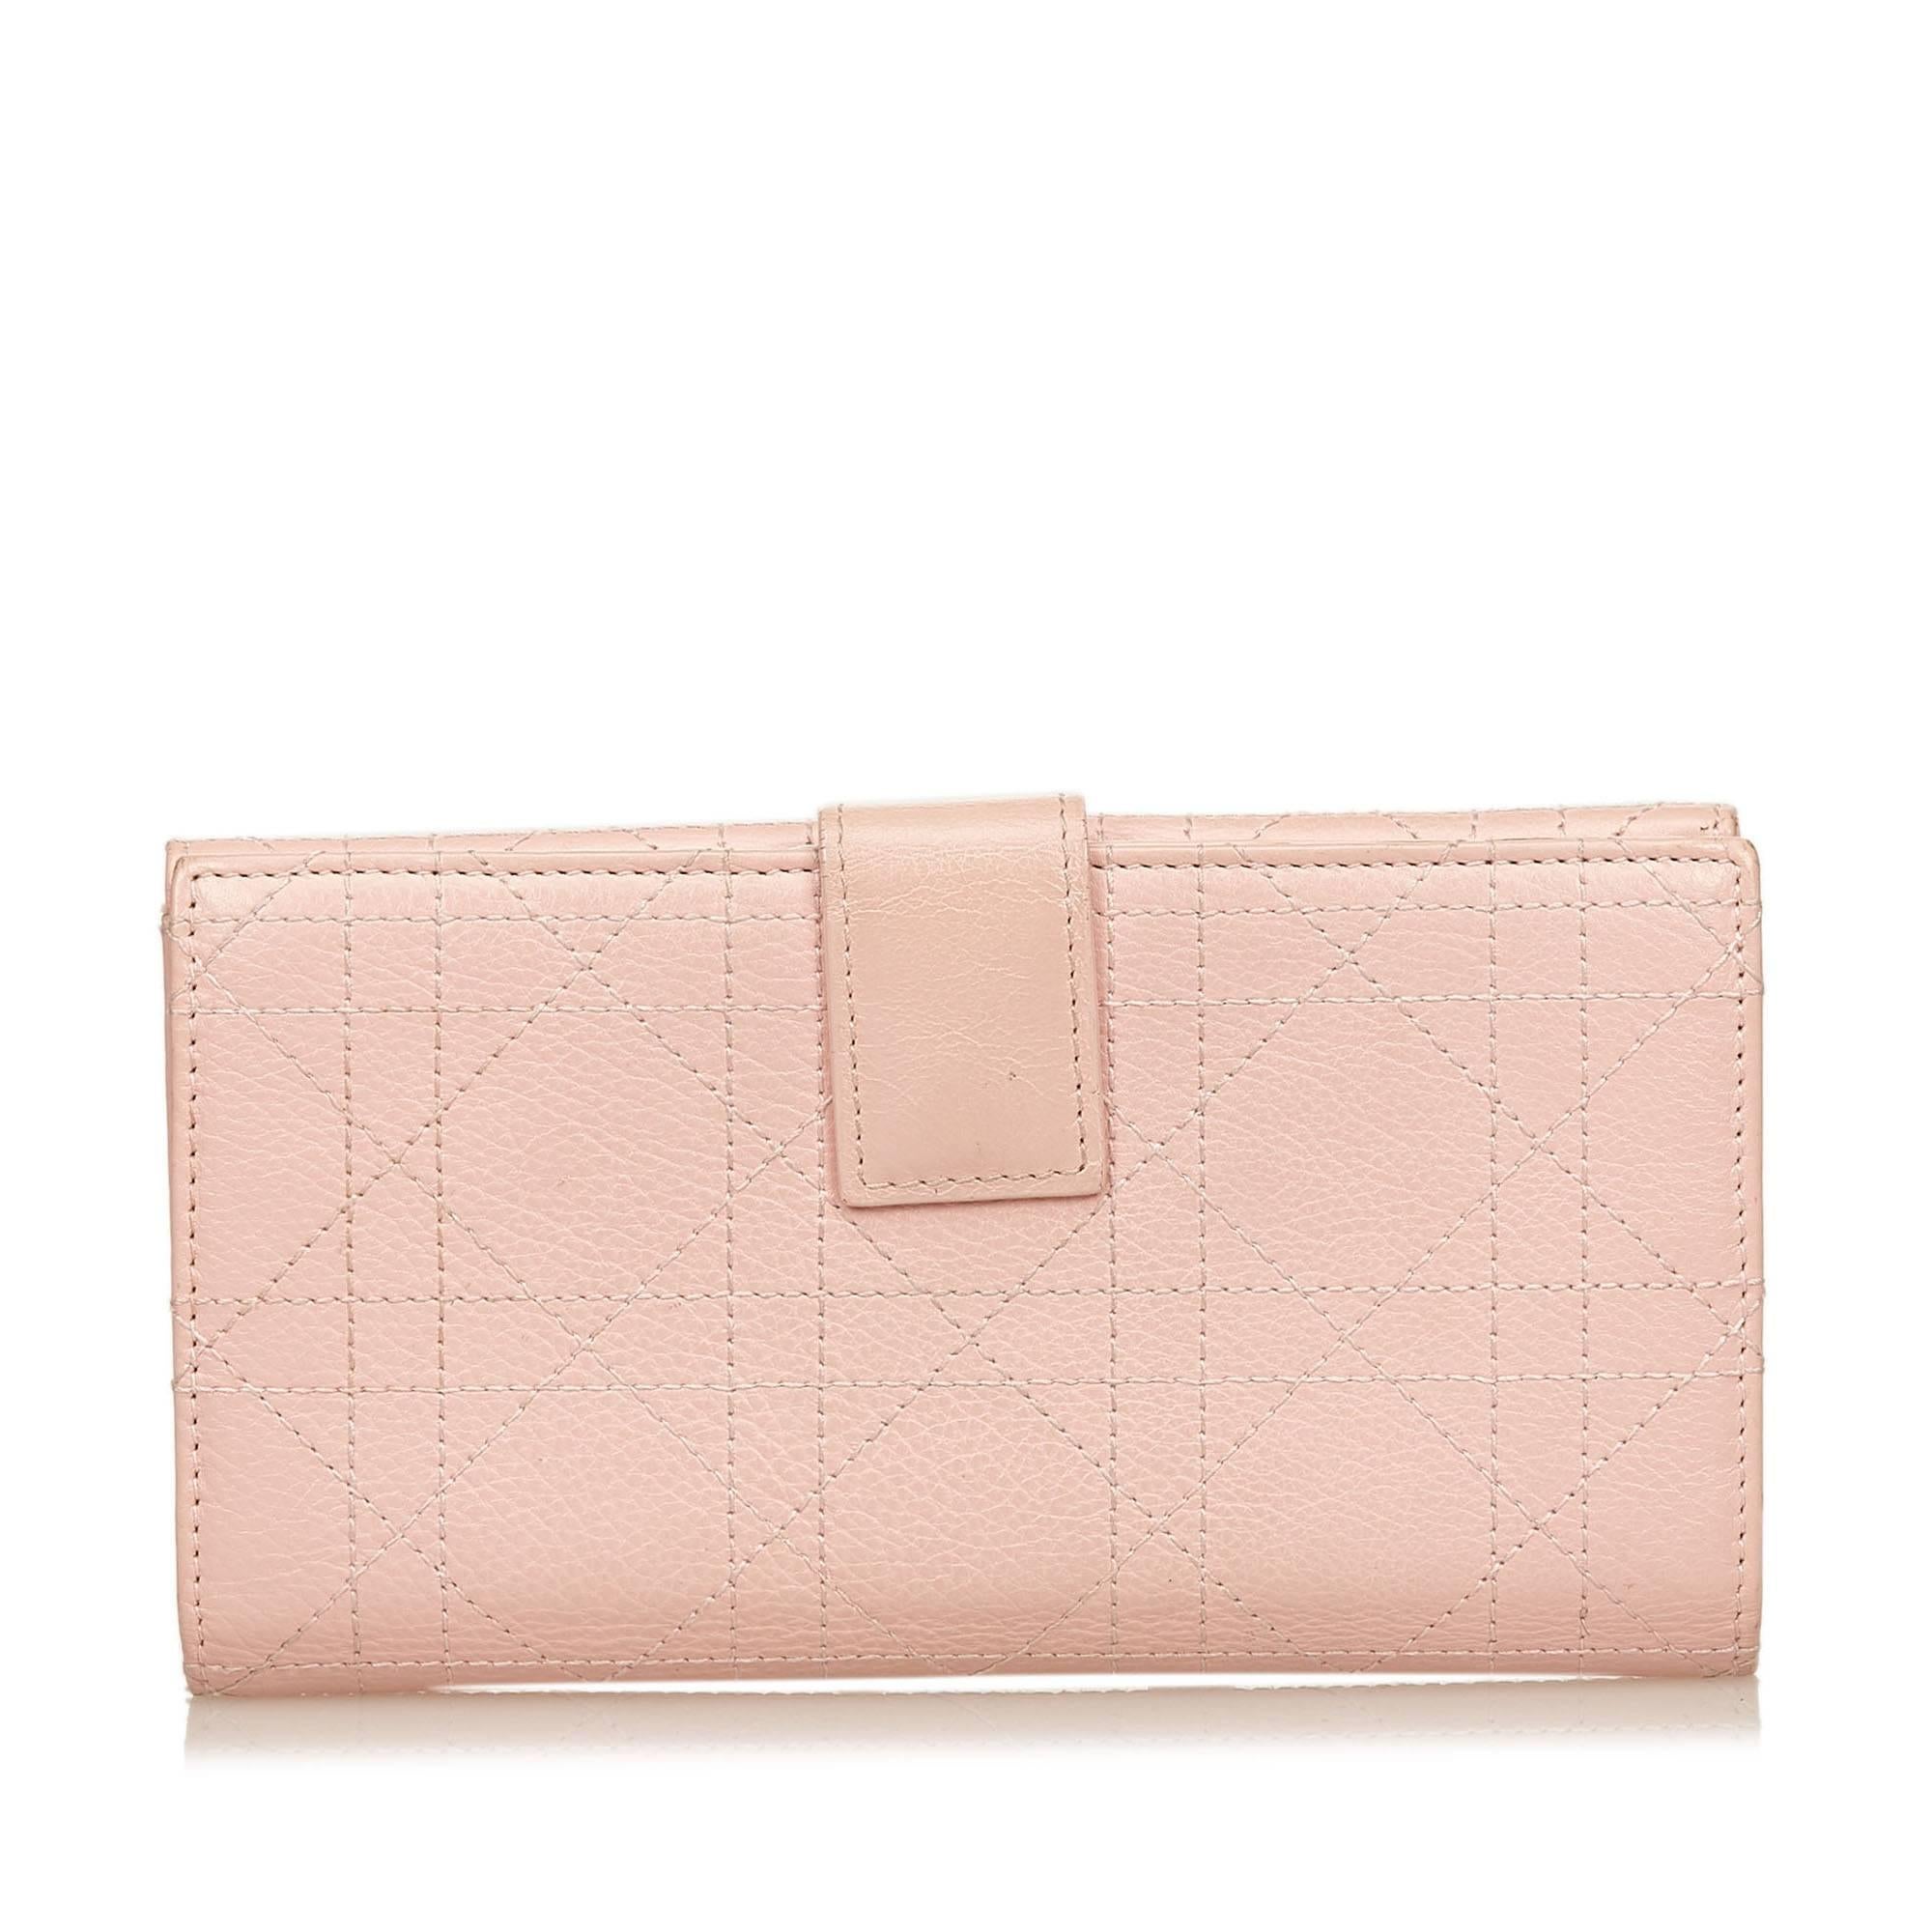 Dior Pink Leather Cannage Wallet 1